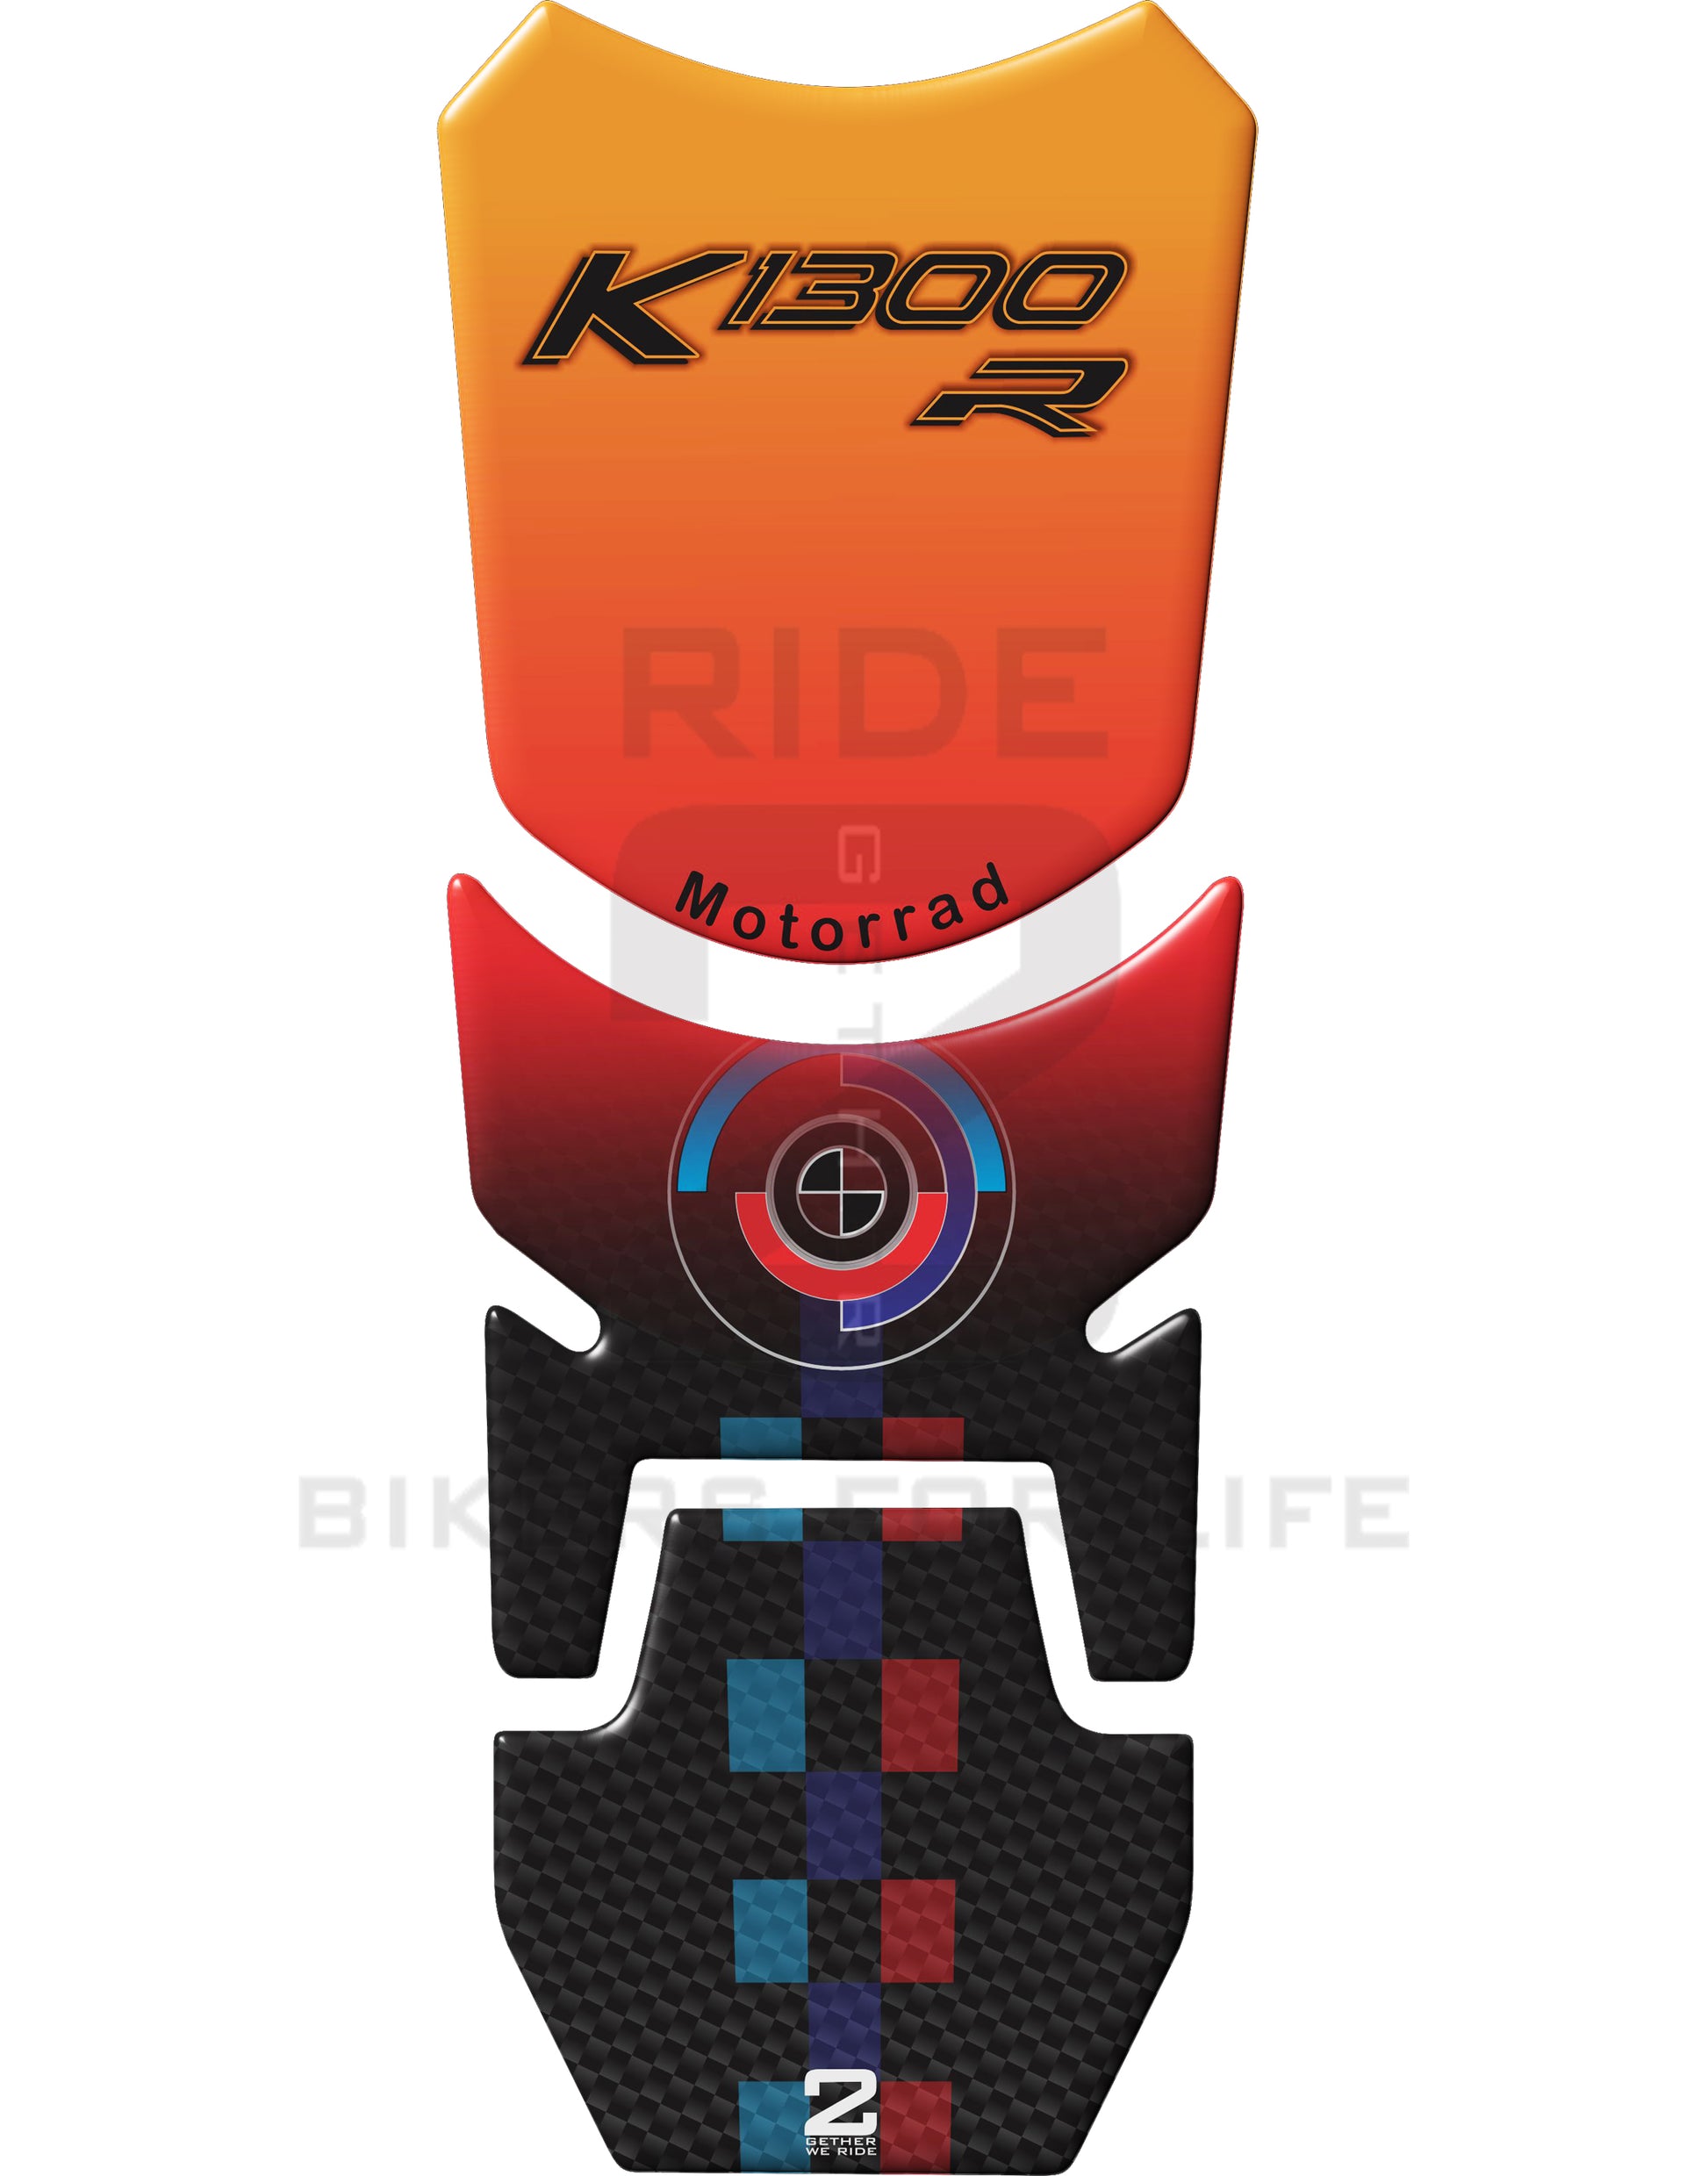 The BMW K 1300 R Orange and Black Tank Pad is a protective accessory designed specifically for the BMW K 1300 R motorcycle model.